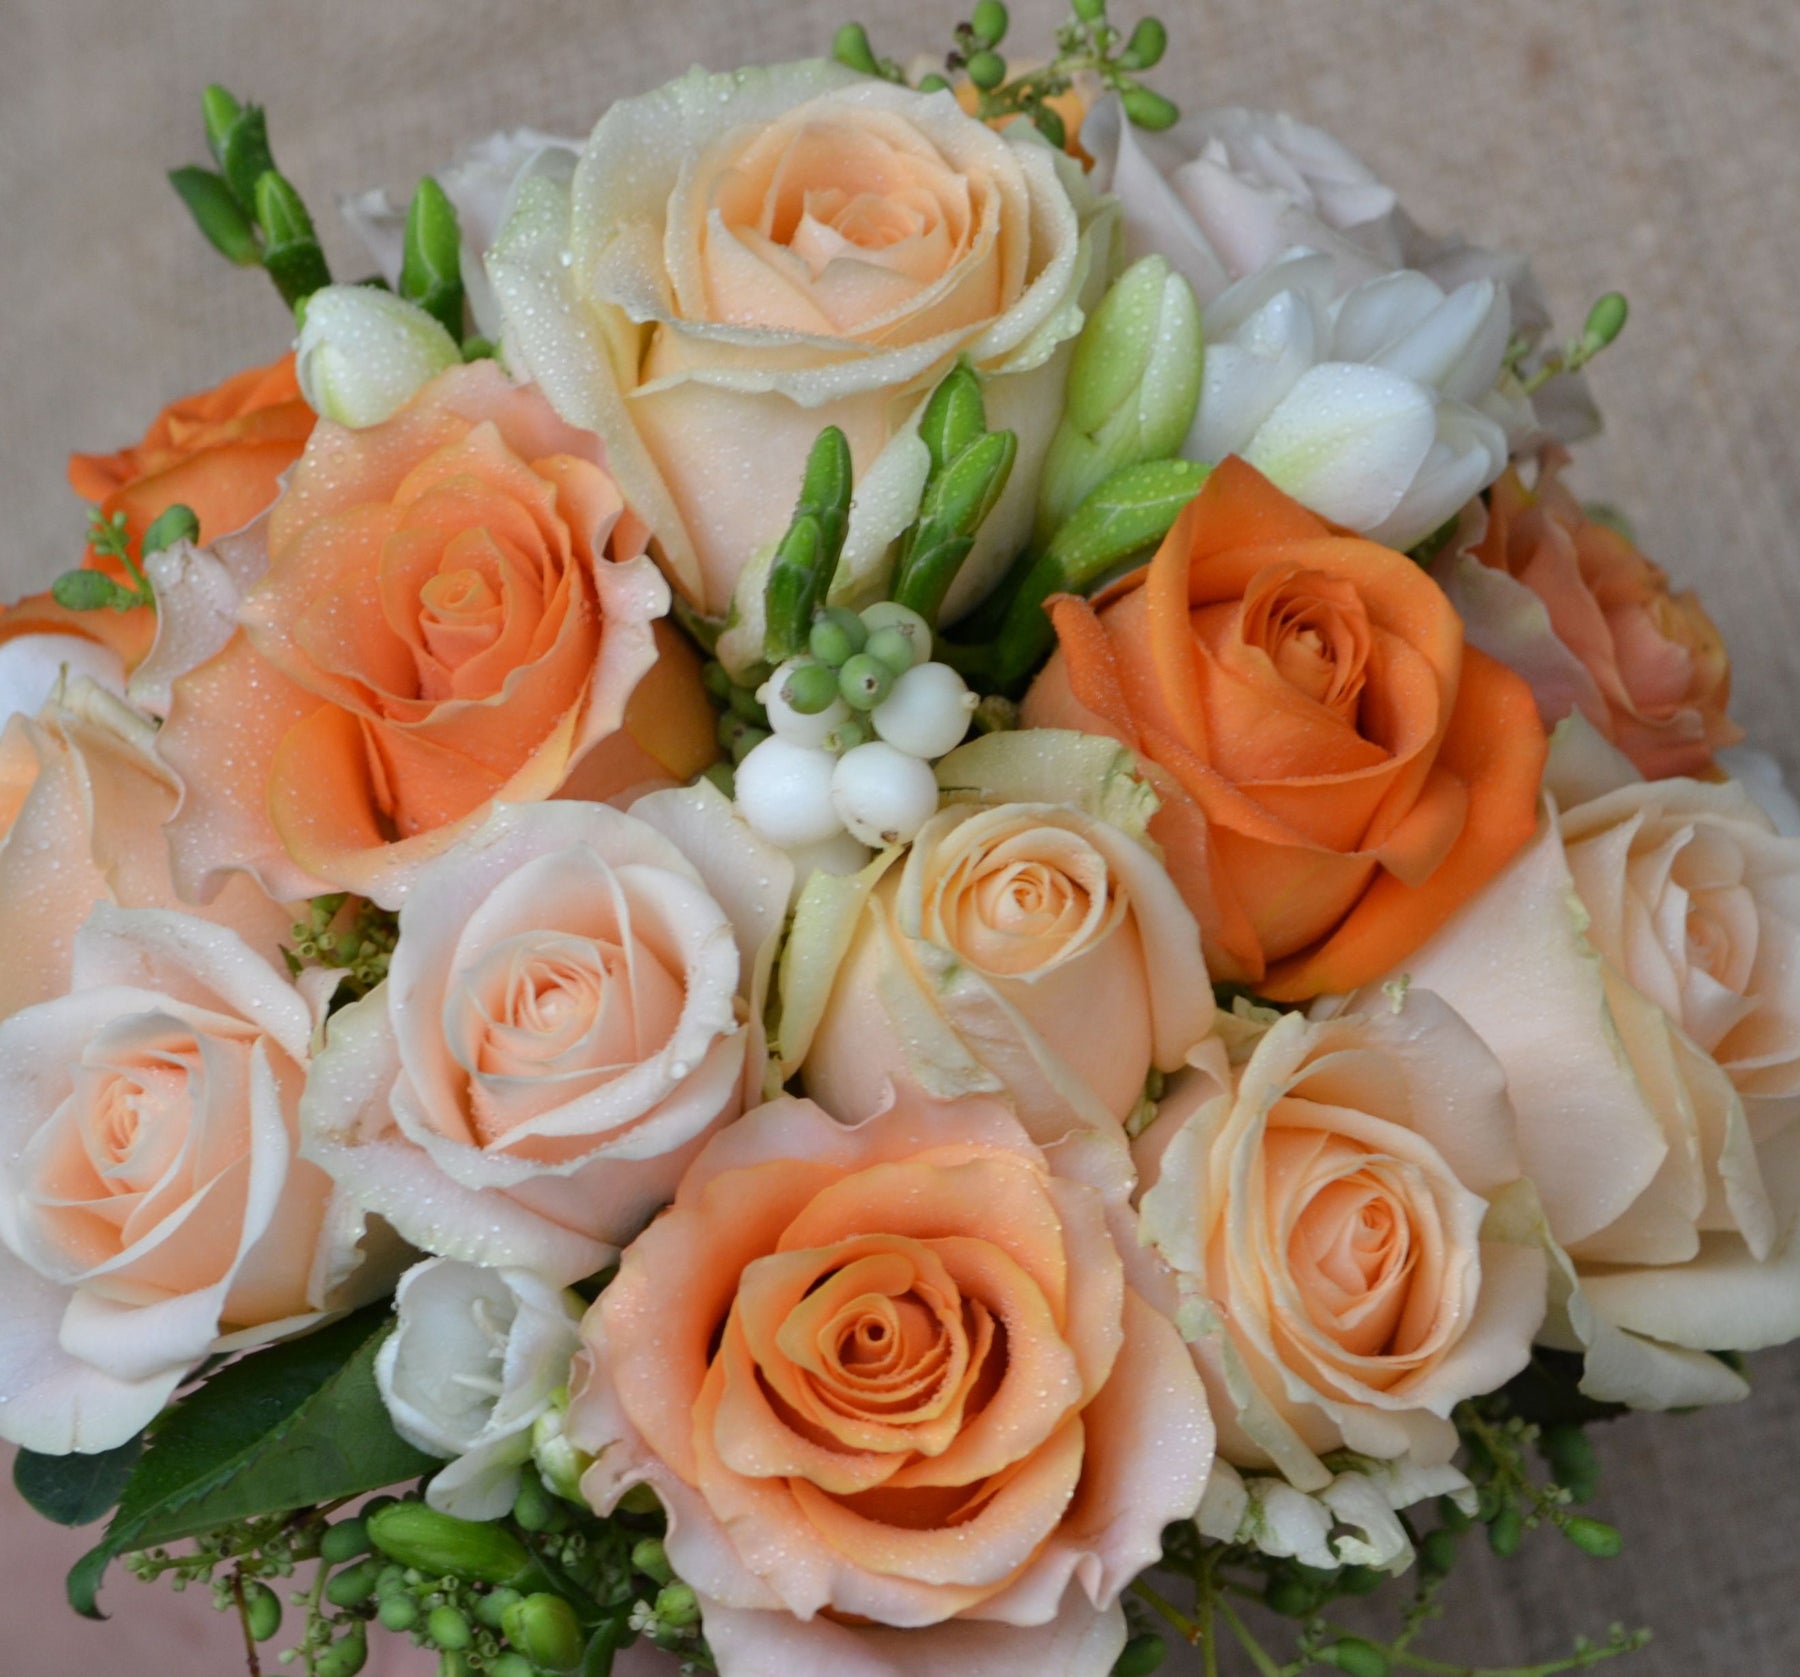 Sunny Shades and Delicate Hues: The Wonders of Orange and Peach Roses